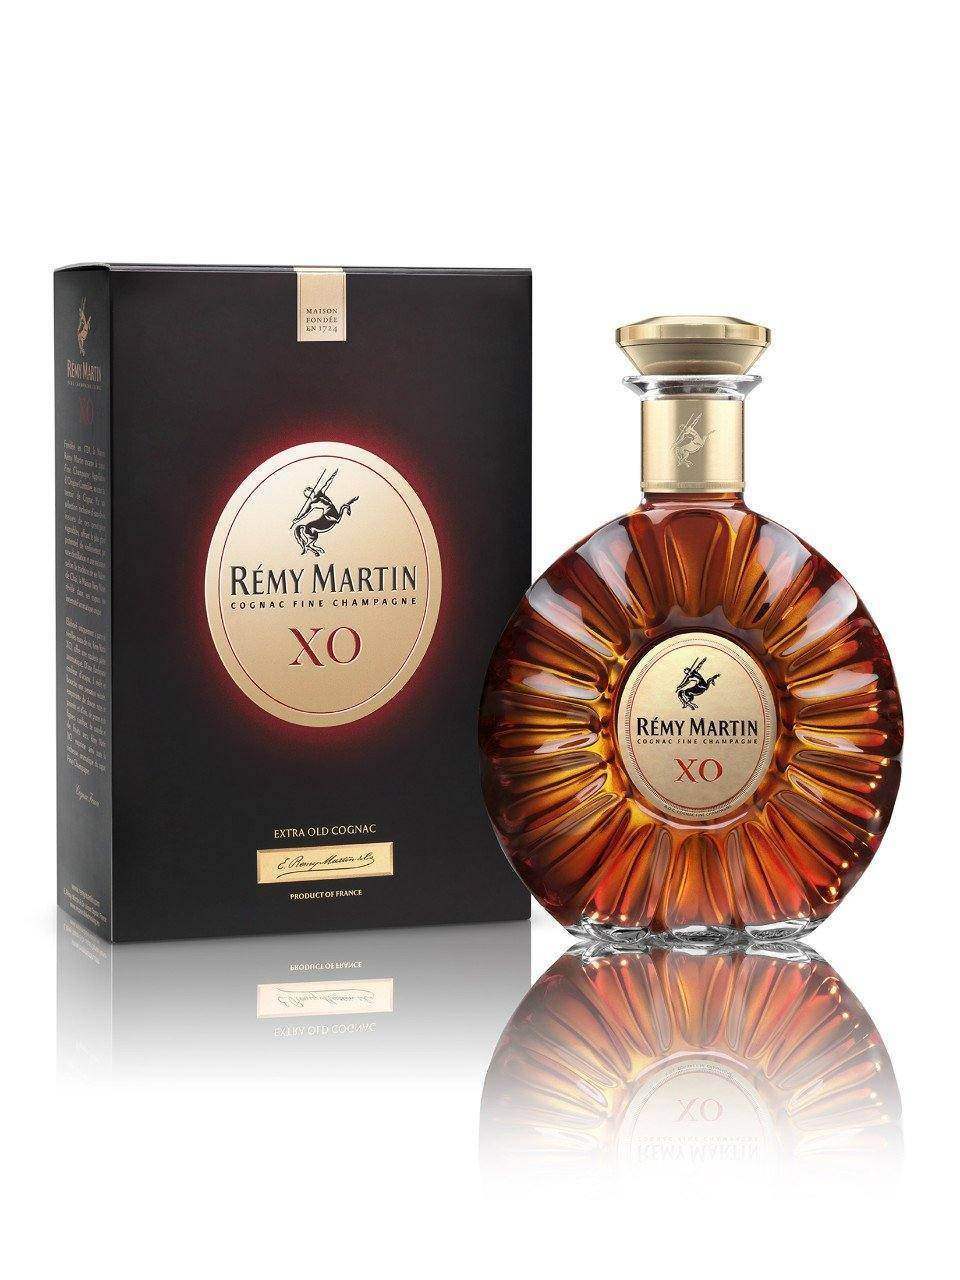 Remy Martin XO Excellence Cognac | Exquisite Wine & Alcohol Gift Delivery Toronto Canada | Vyno